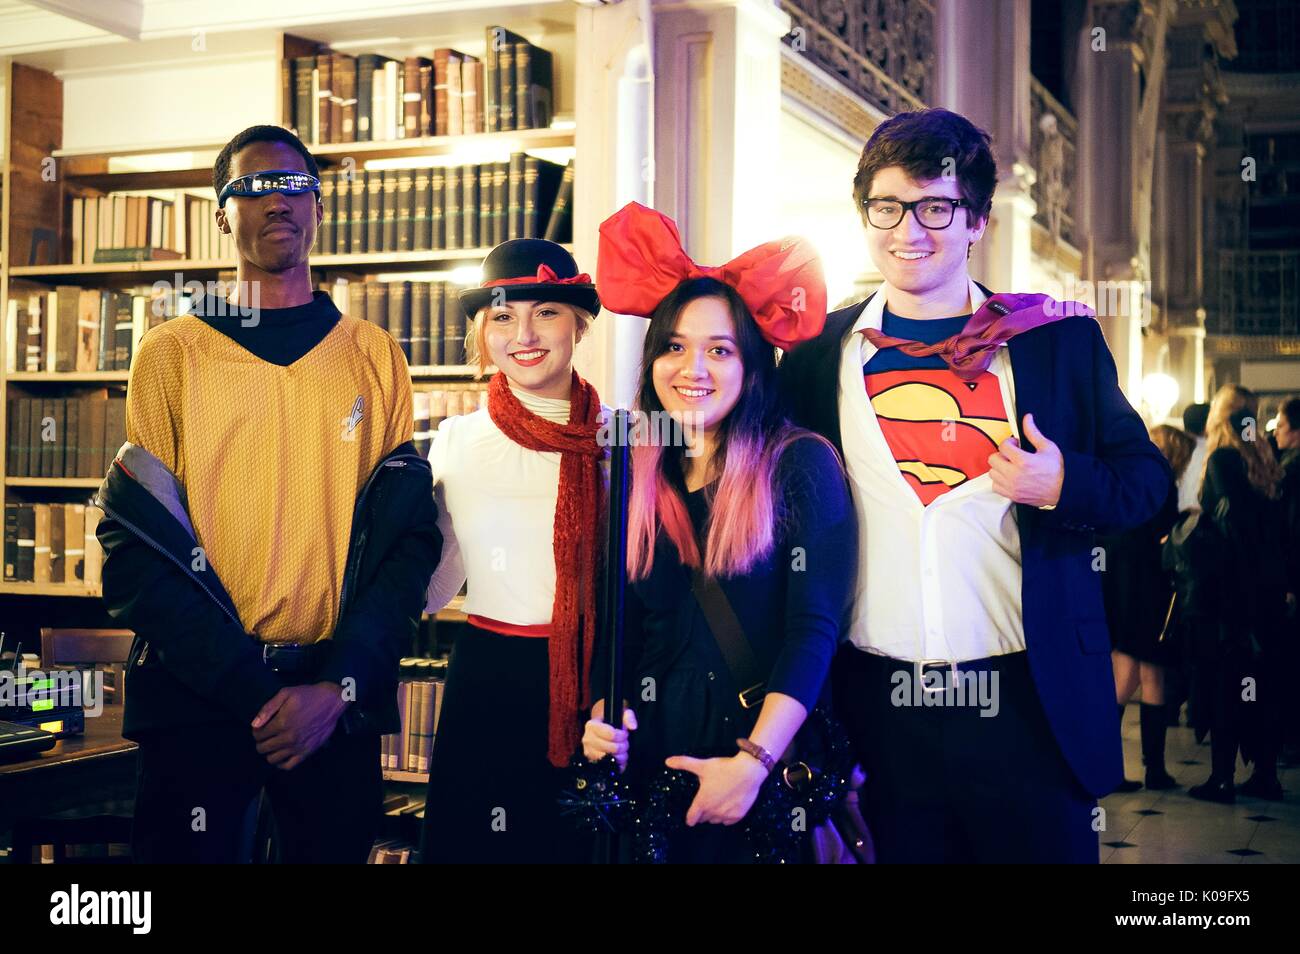 Four college students are in costume and are posing, the boy on the far right is dressed as Superman and the girl next to him is wearing a large red bow on her head, the boy on the far left is wearing sunglasses and the girl next to him is dressed as Mary Poppins, 2015. Courtesy Eric Chen. Stock Photo